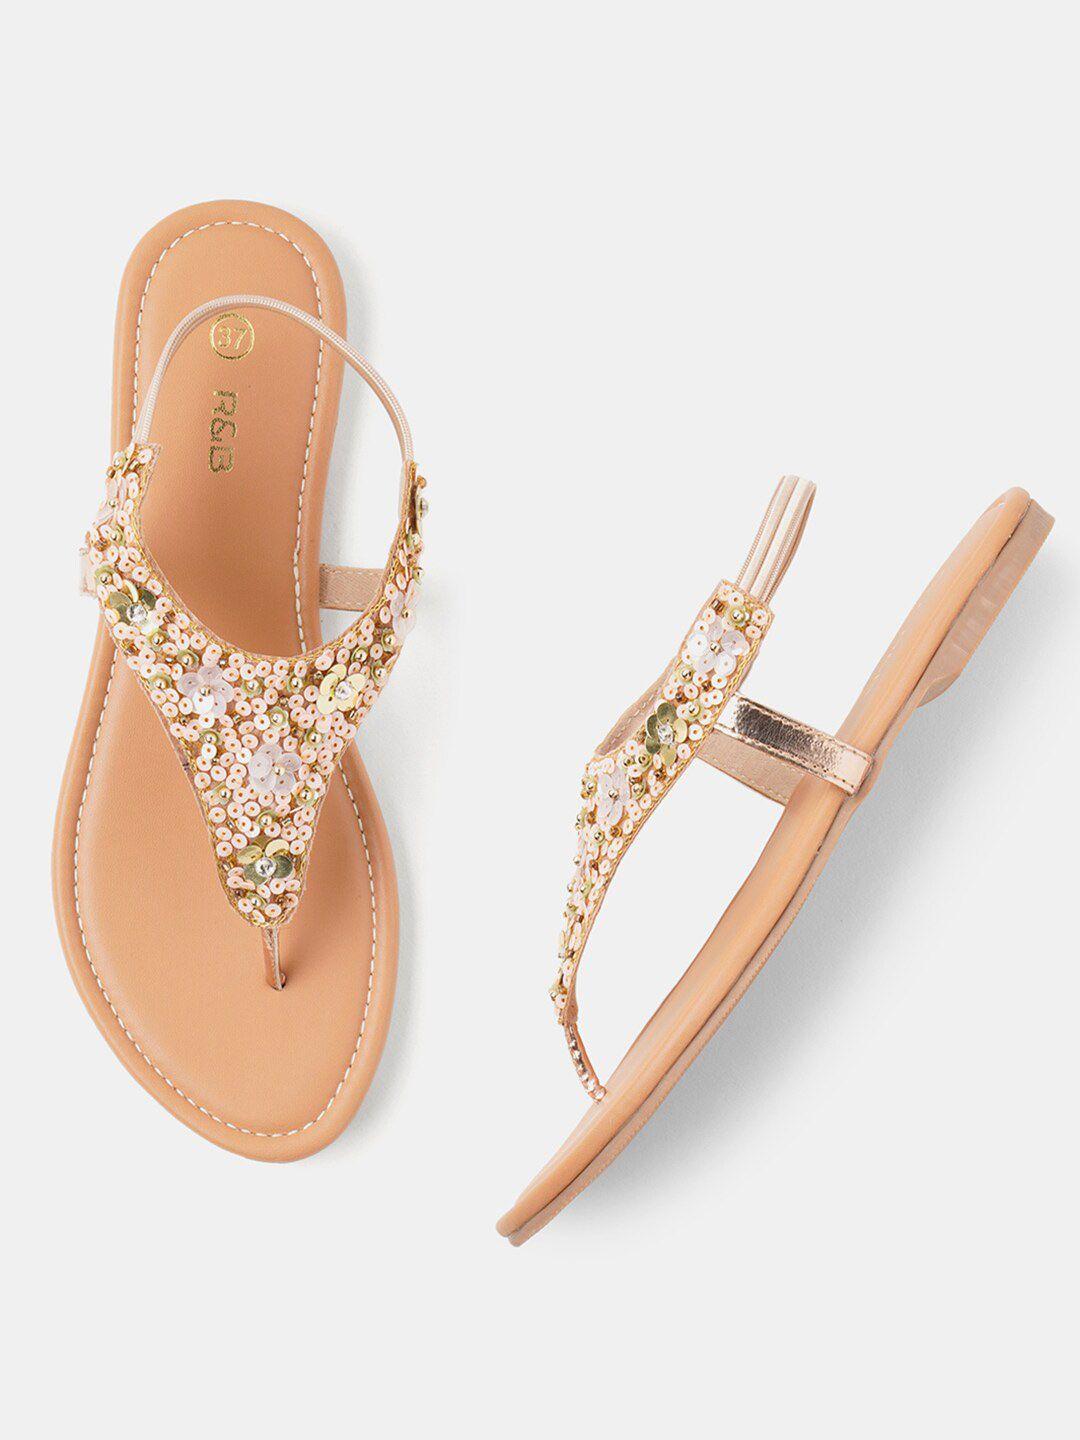 r&b-sequinned-embellished-t-strap-flats-with-backstrap